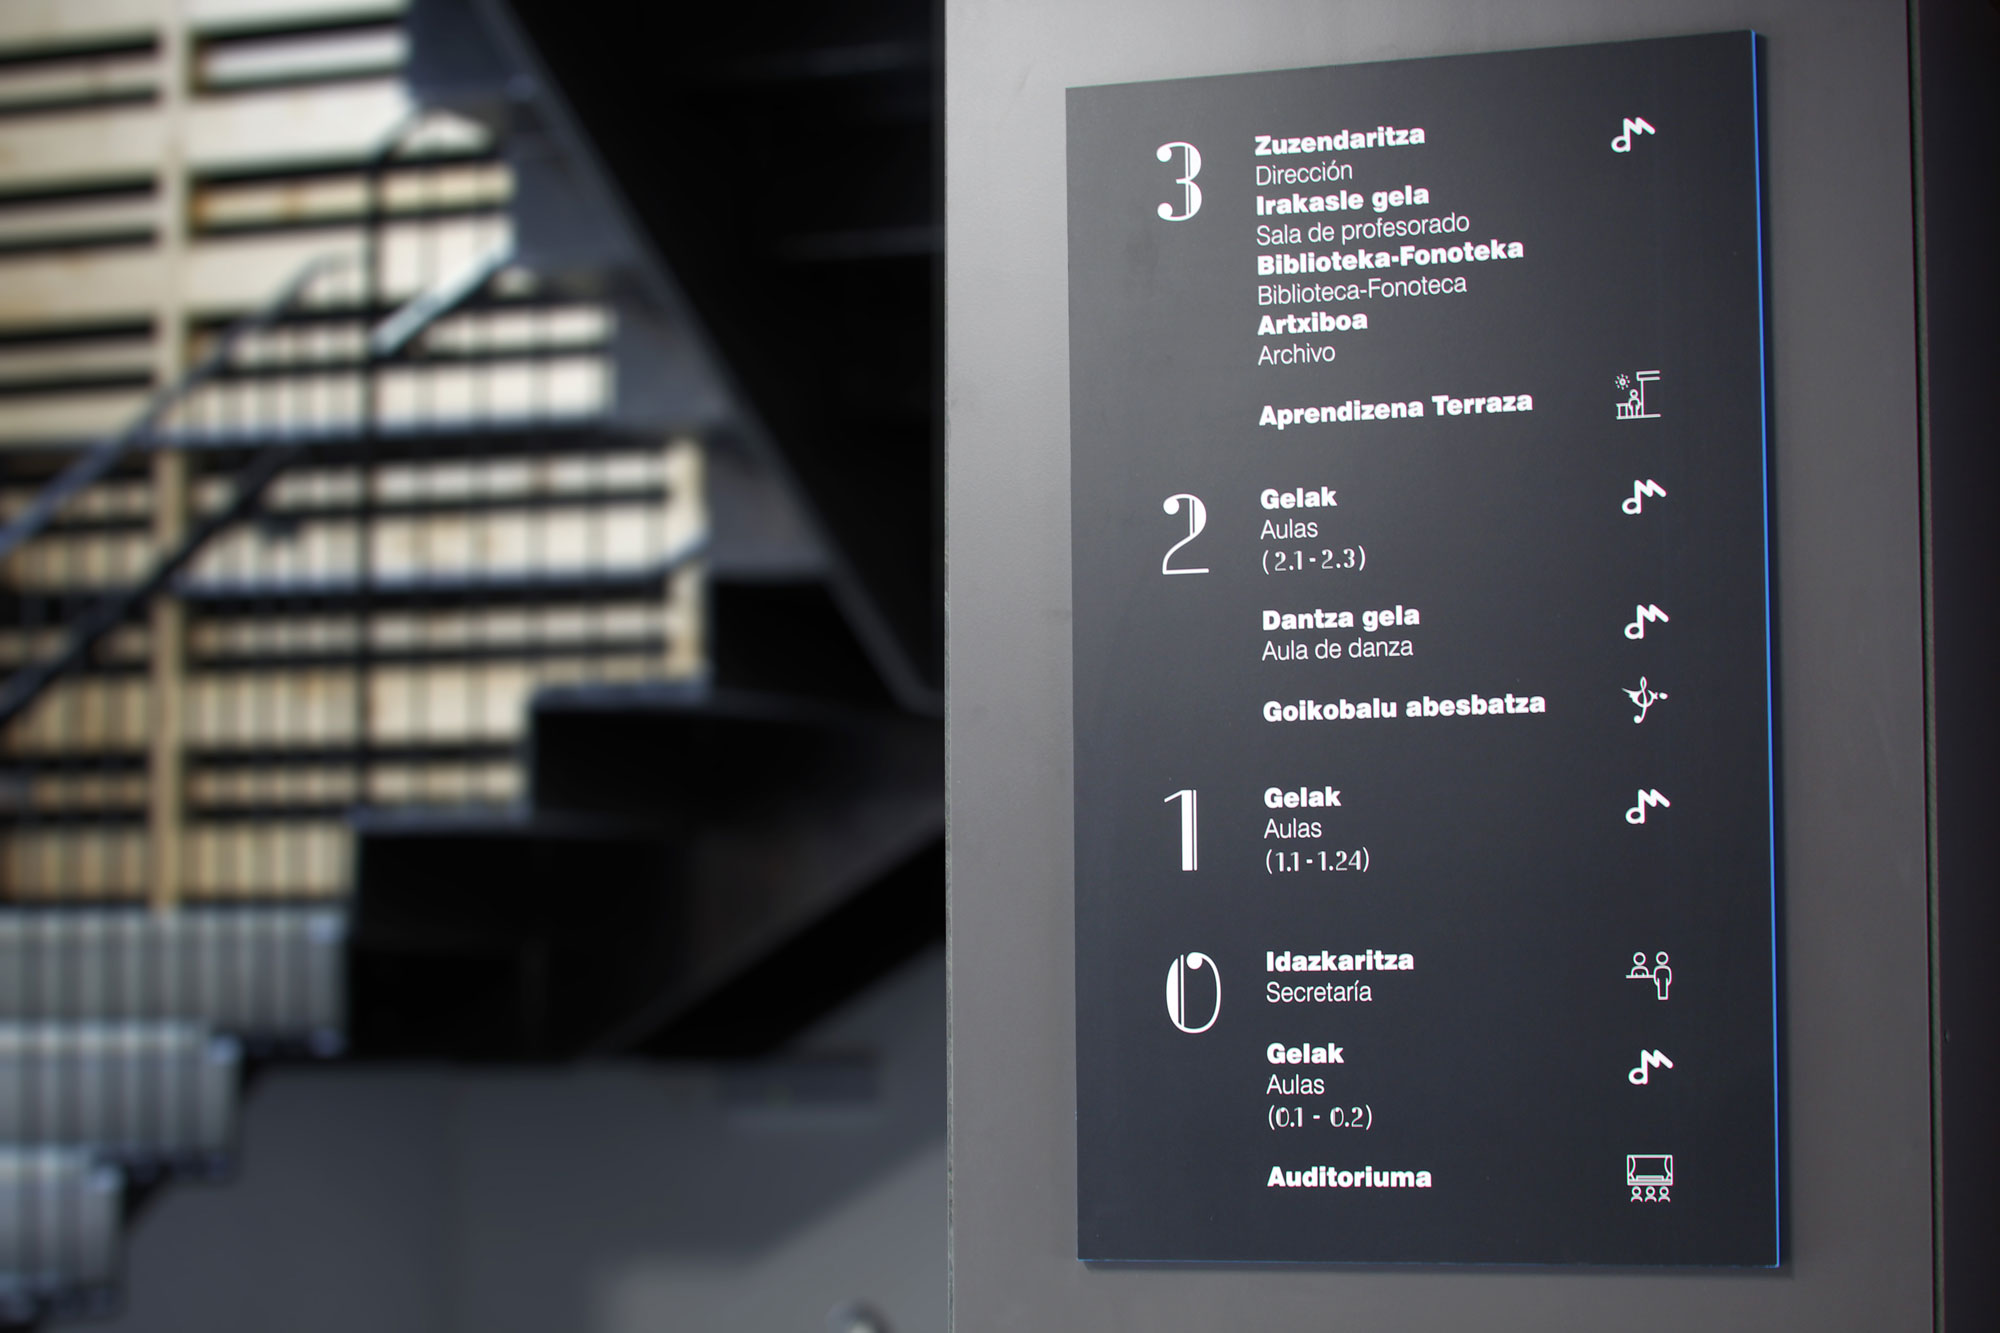 A information panel displaying the main areas on each floor